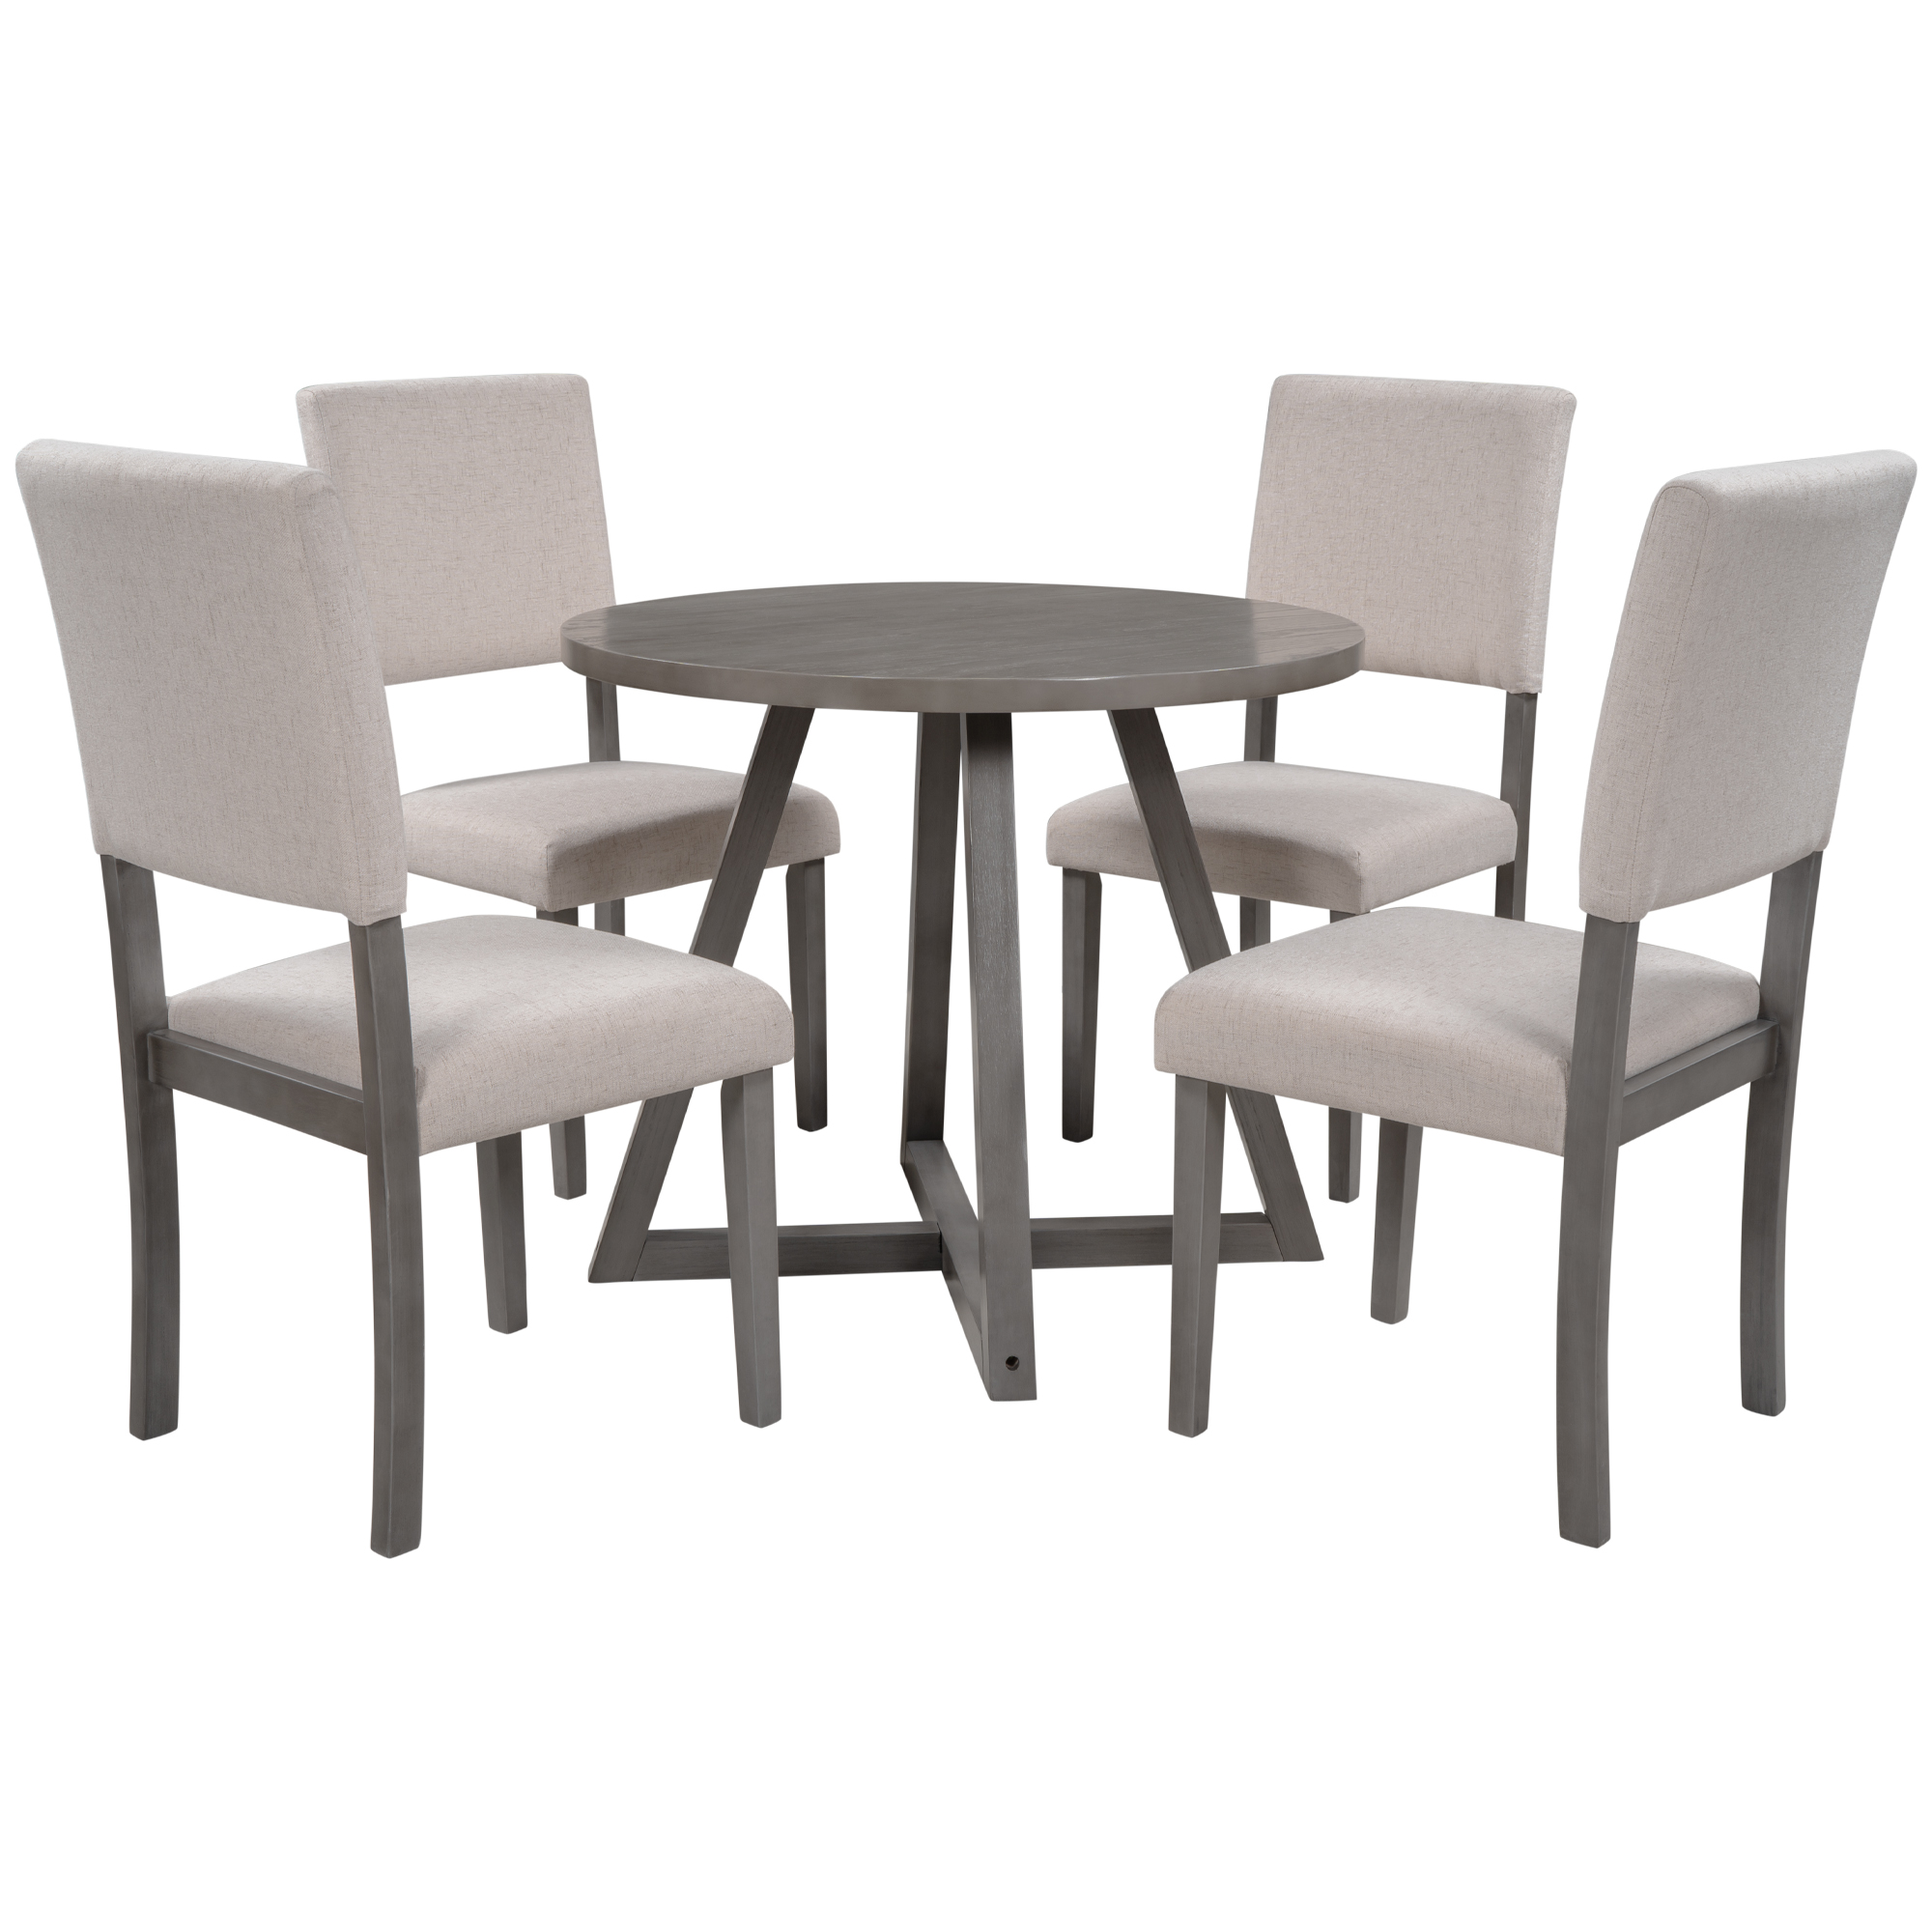 Mid-Century Wood  5-Piece Kitchen Dining Table Set with Round Table, 4 Upholstered Dining Chairs for Small Places, Gray Table + Beige Chair-CASAINC